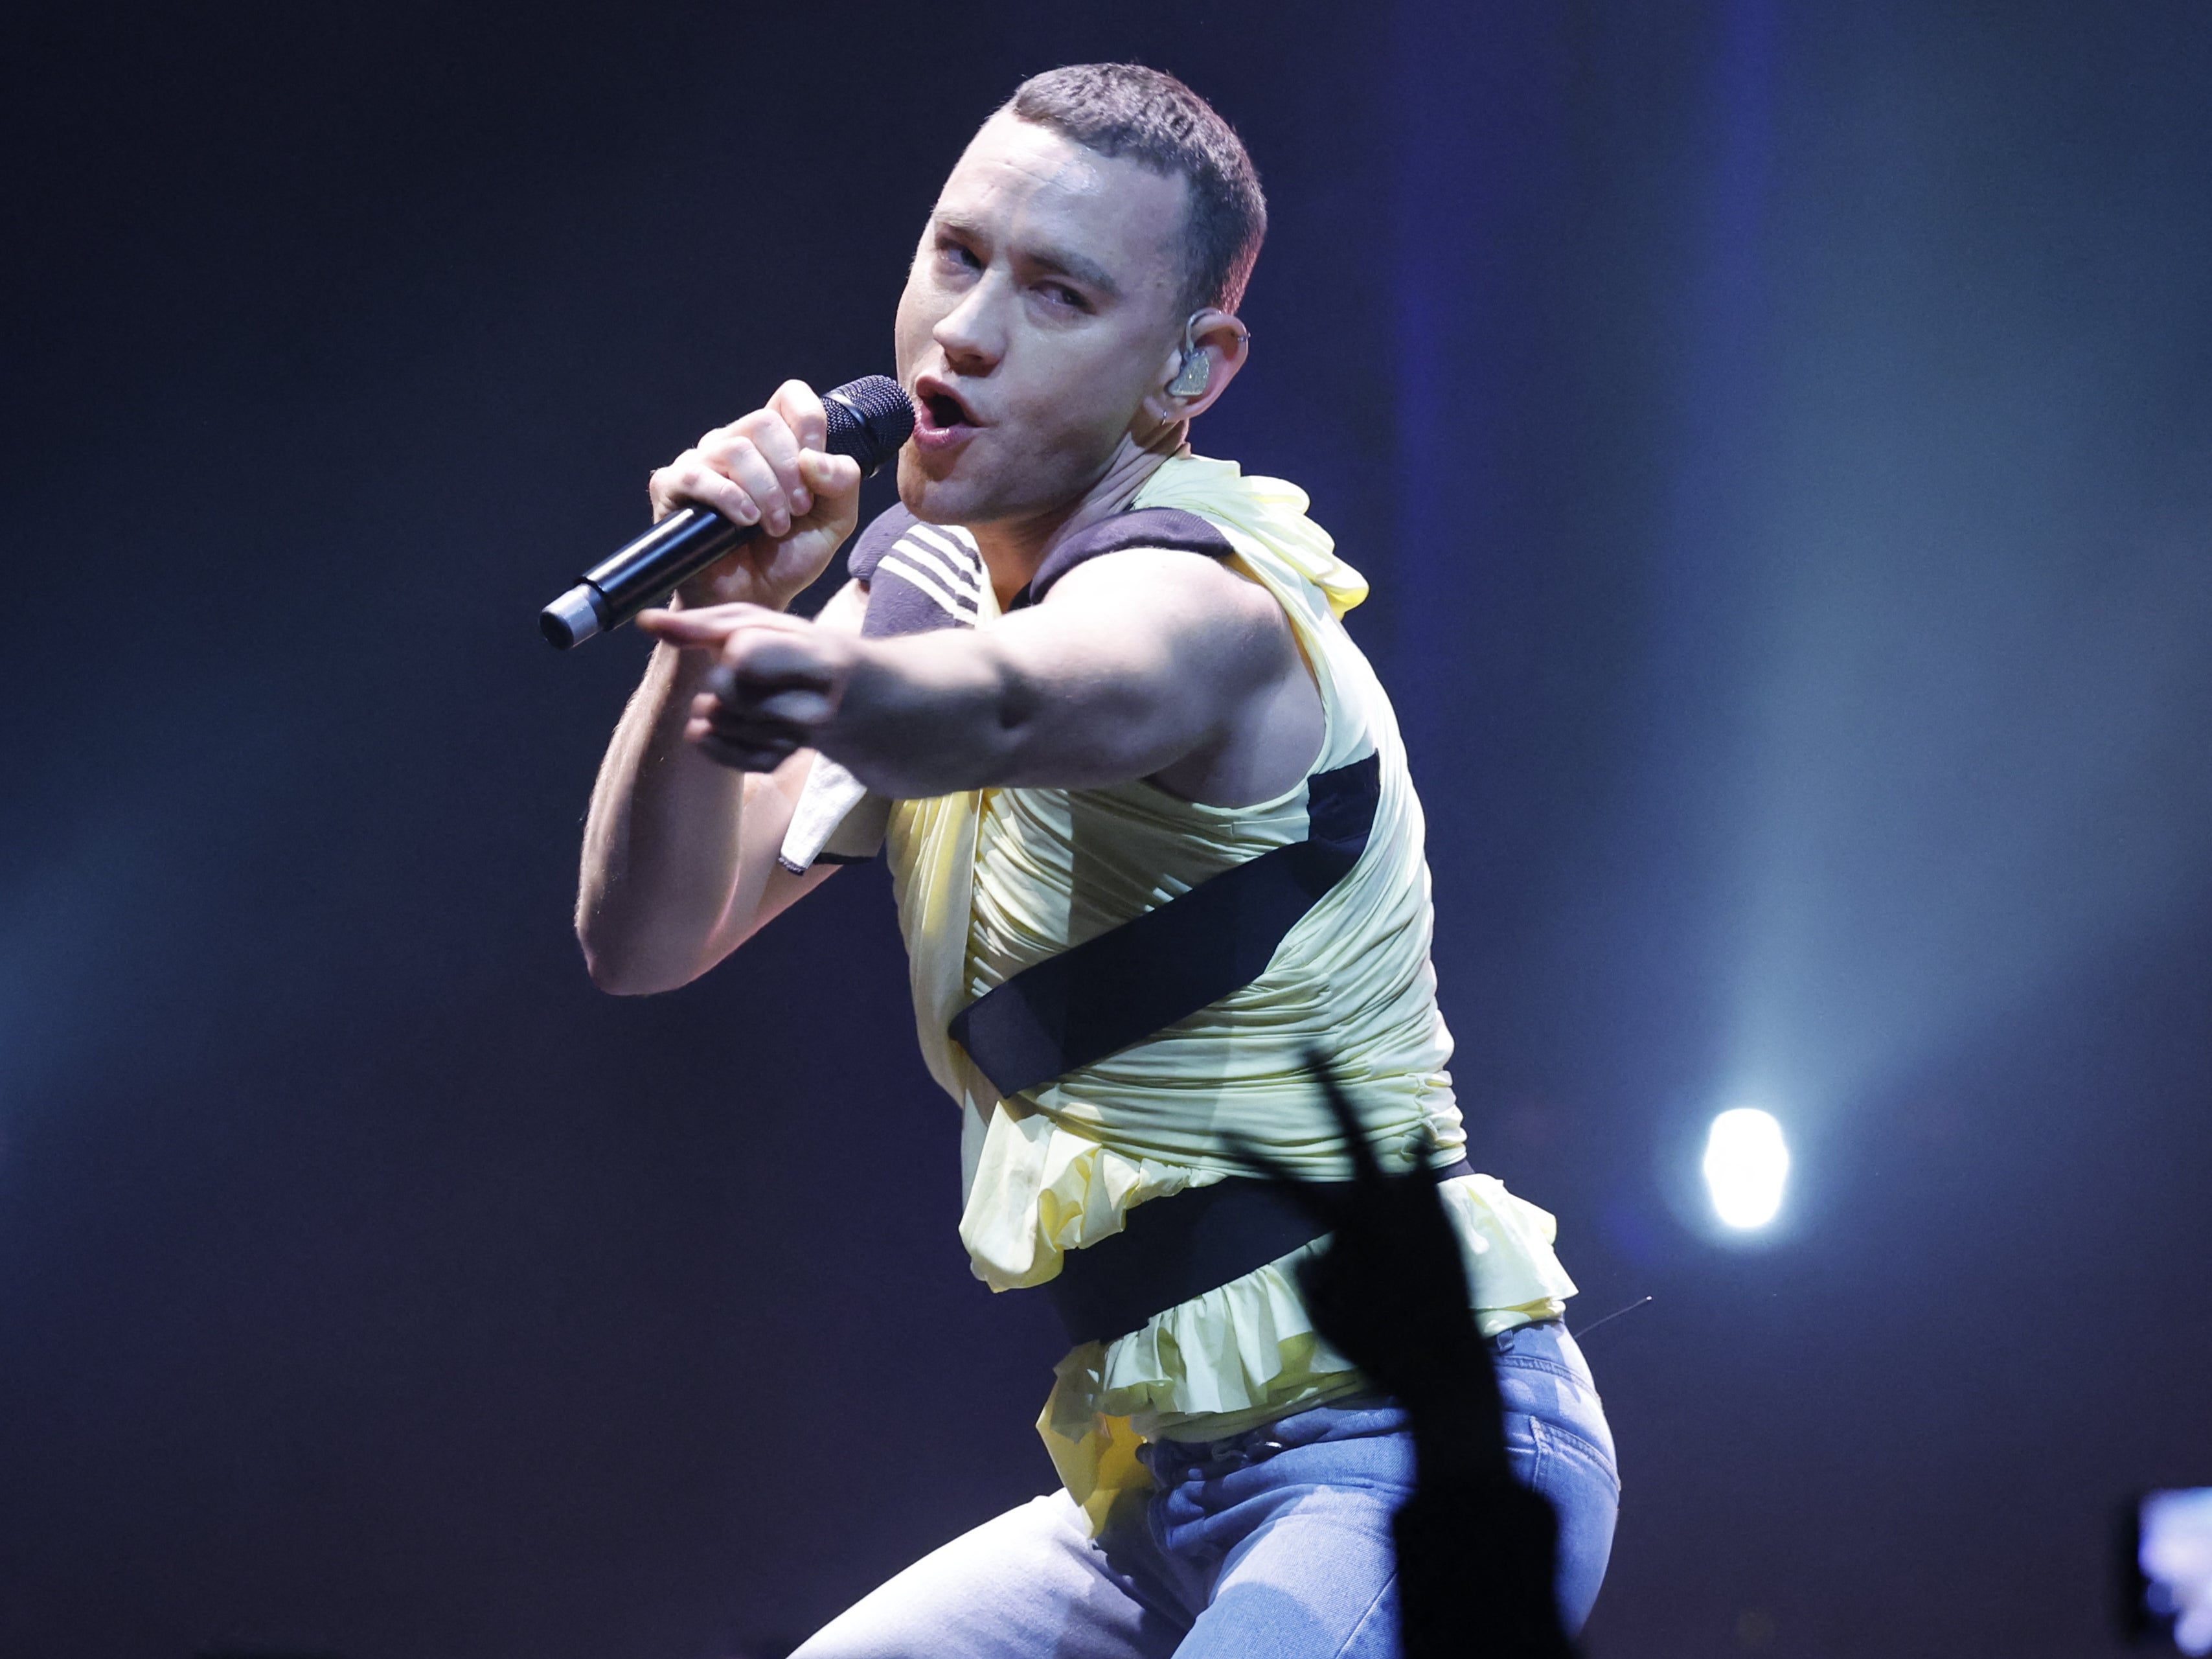 Will Graham Norton be kinder to the UK’s entry Olly Alexander?